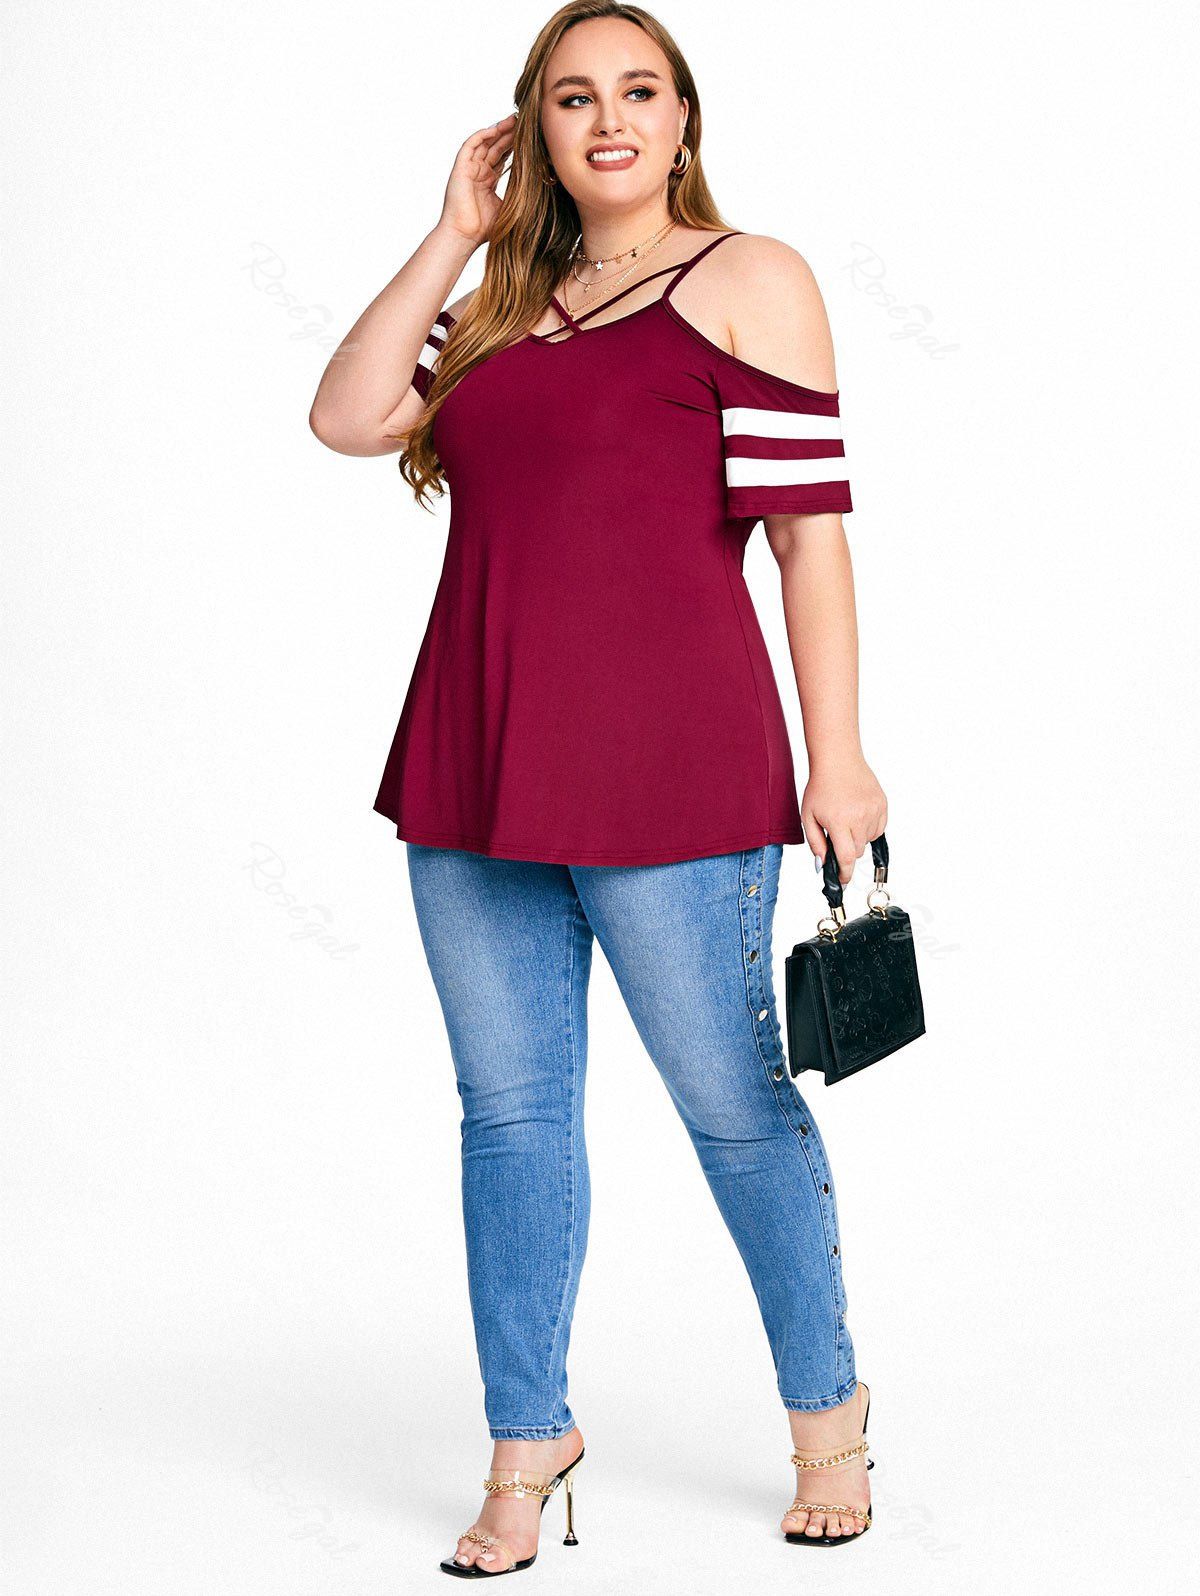 Shop Colorblock Cold Shoulder Crisscross Tee and Studded Jeans Plus Size Summer Outfit  